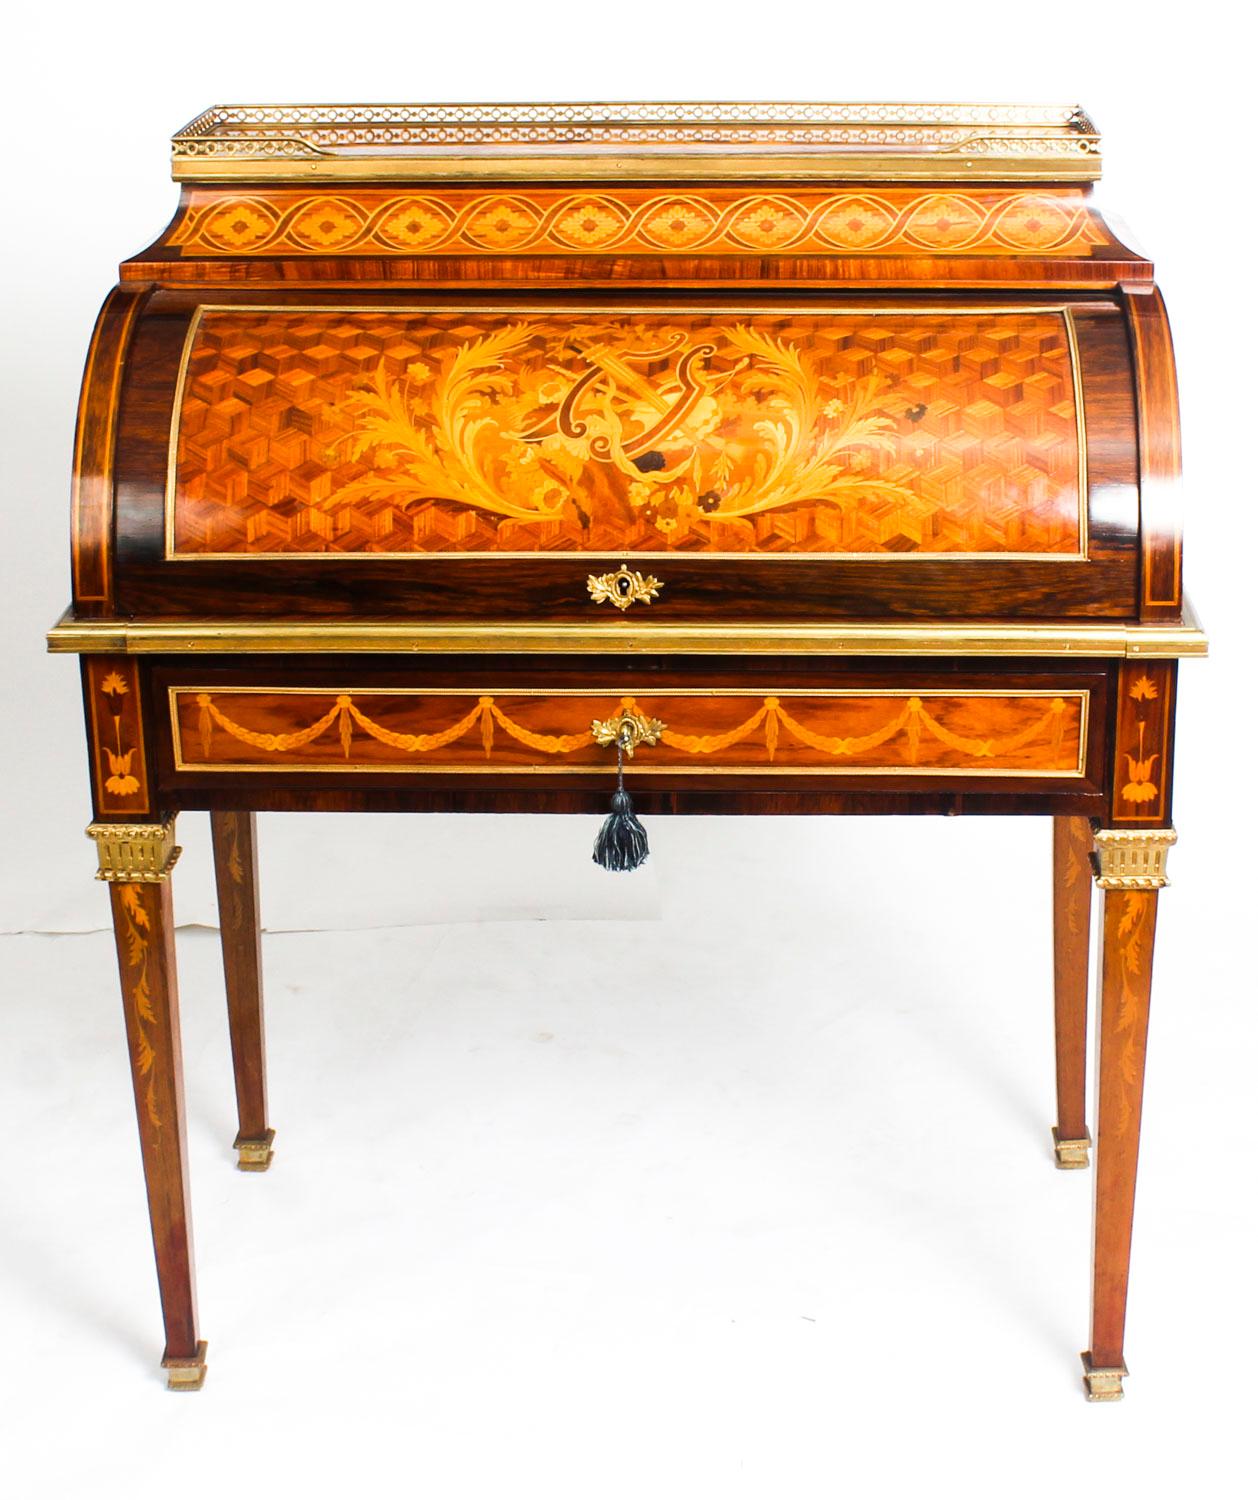 This is a gorgeous antique French Louis XVI style kingwood bureau a cylindre, in the manner of Riesener, bearing the ivorine label of the renowned retailer and cabinet maker Howard & Sons, circa 1880 in date.

It has a pierced brass galleried top